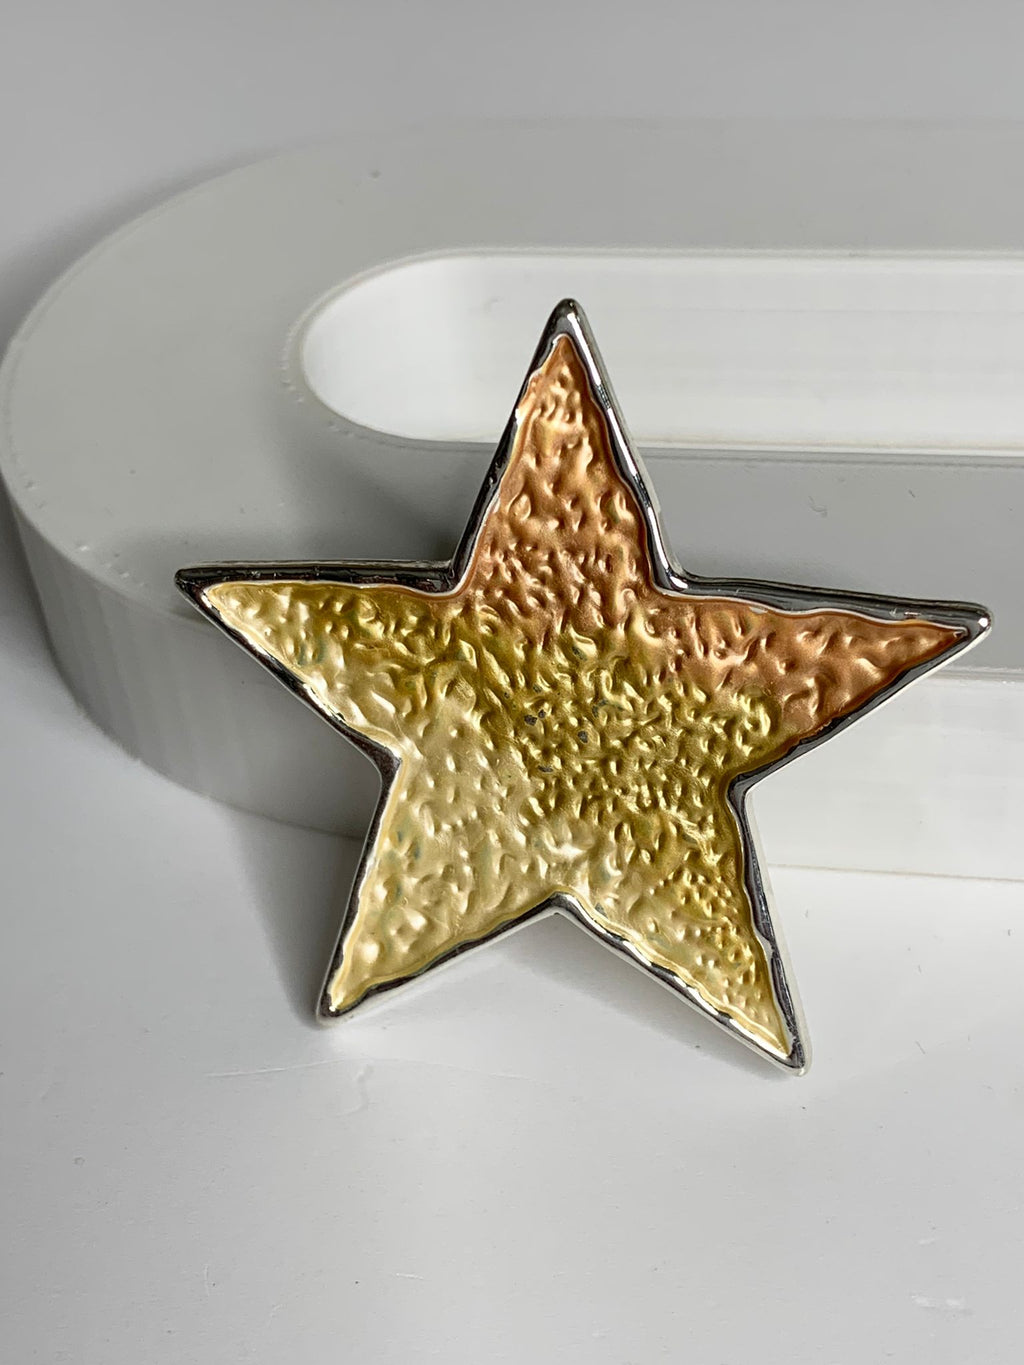 Magnetic brooch & scarf clip - 'star' design in shades of shiny silver, matte yellow, matte mustard and dark matte yellow